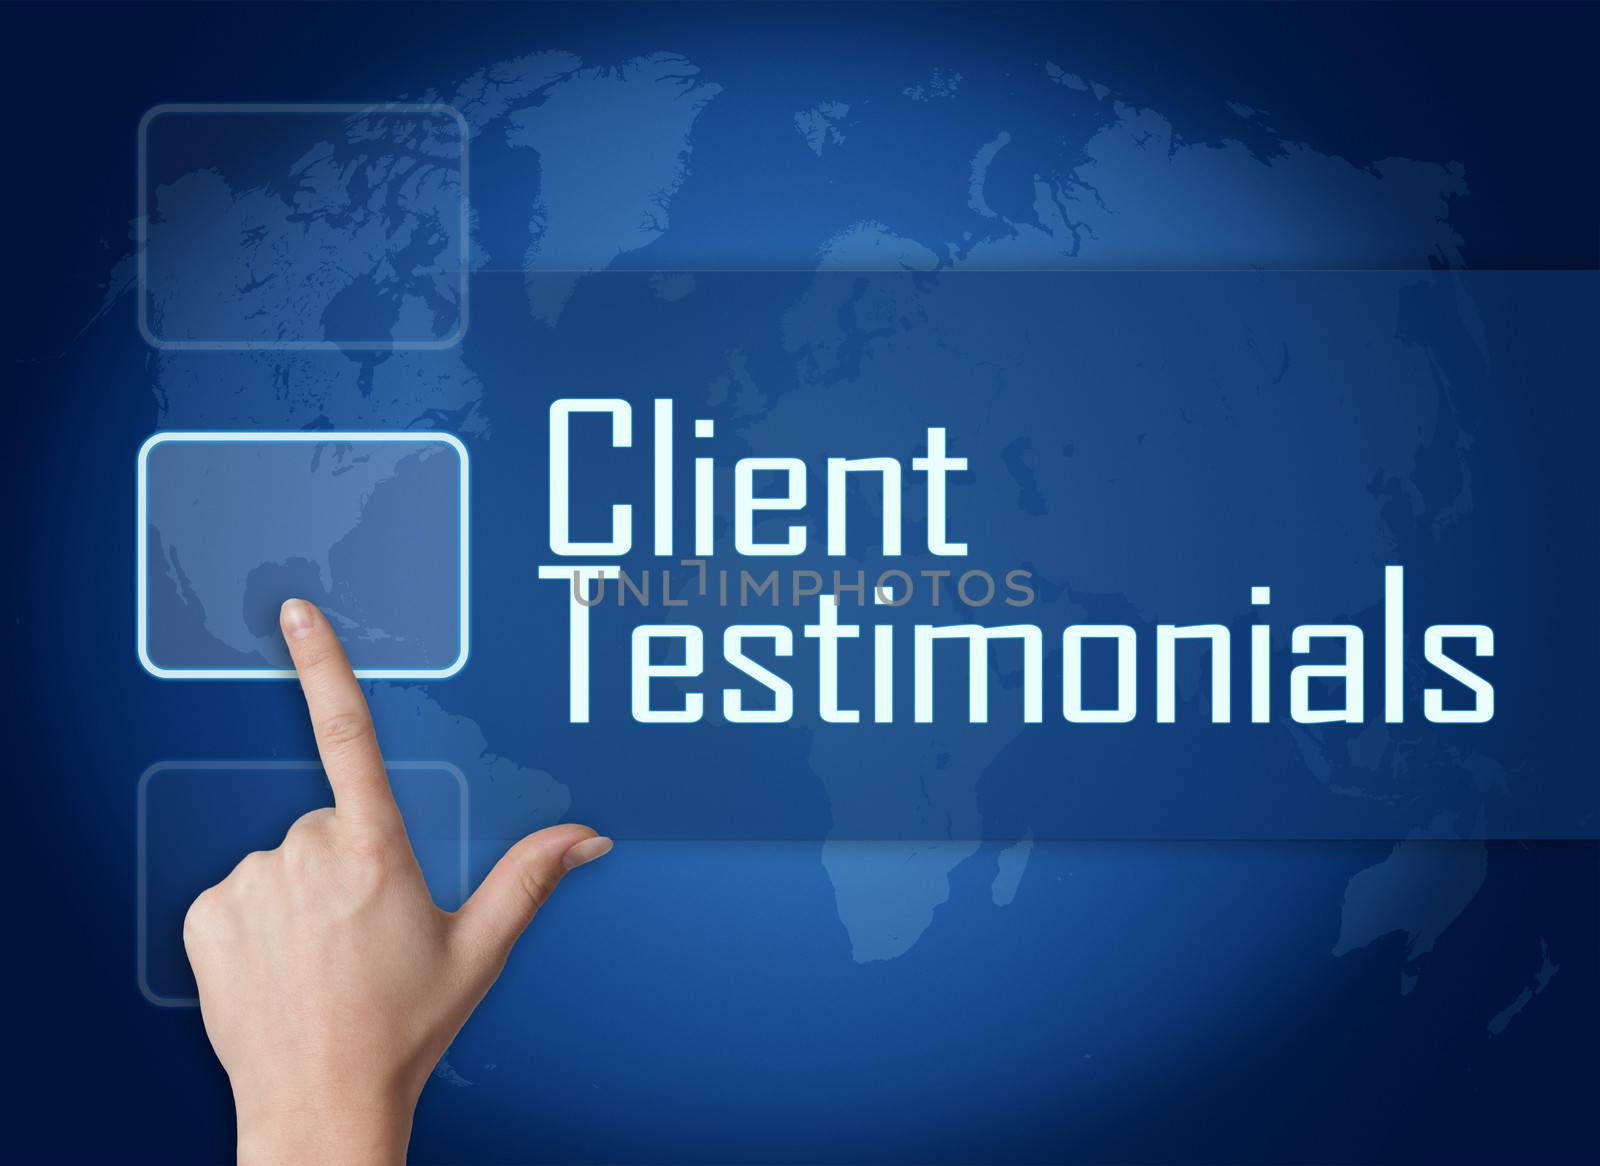 Client Testimonials concept with interface and world map on blue background